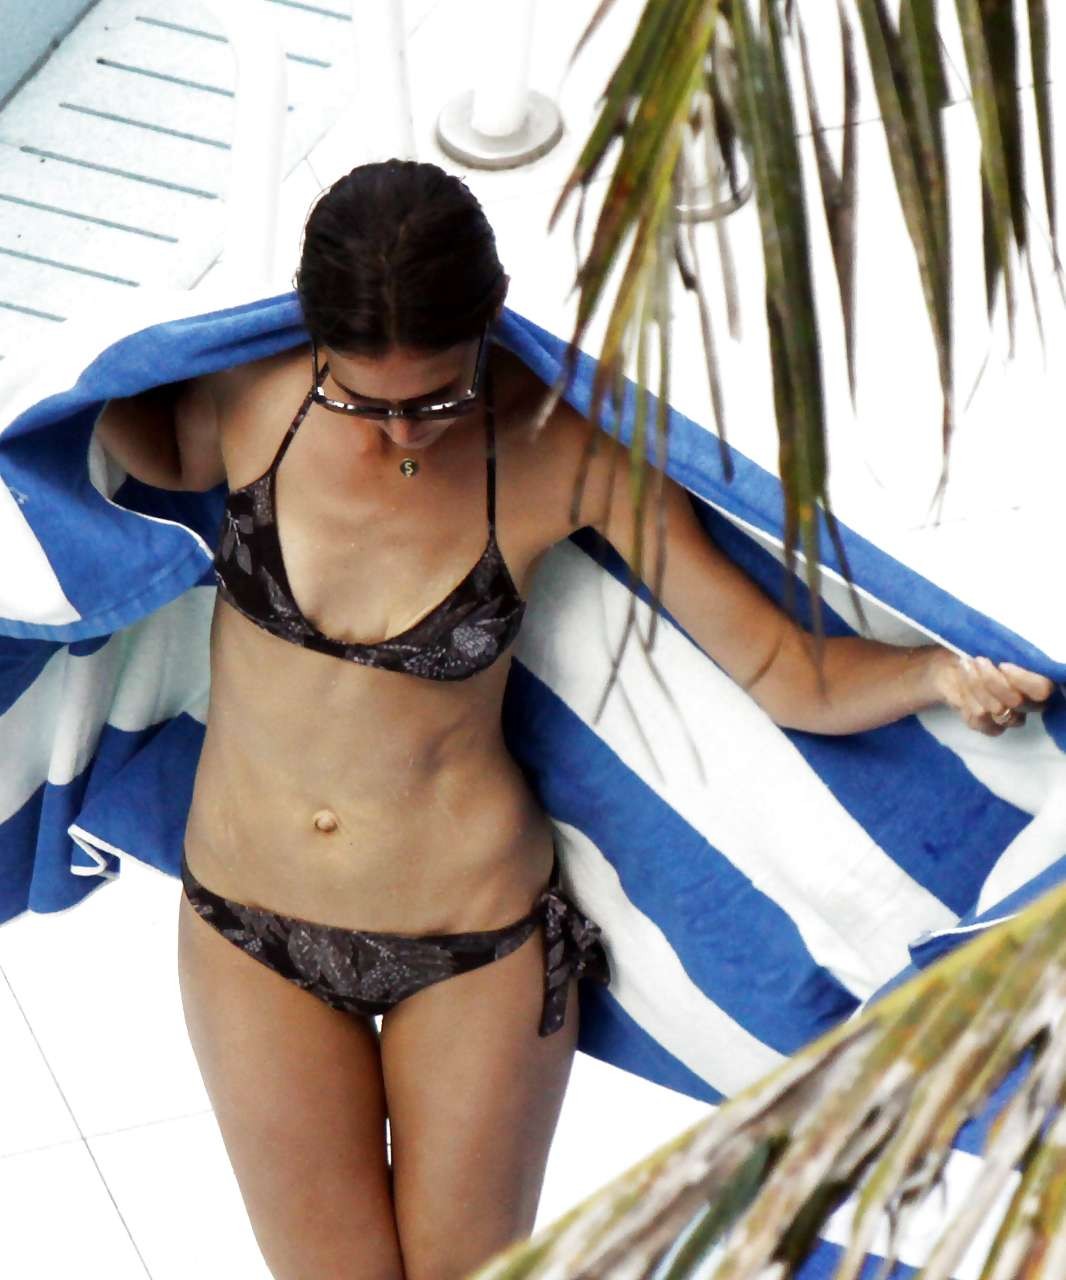 Katie Holmes looking very sexy in bikini on pool paparazzi pictures #75295683